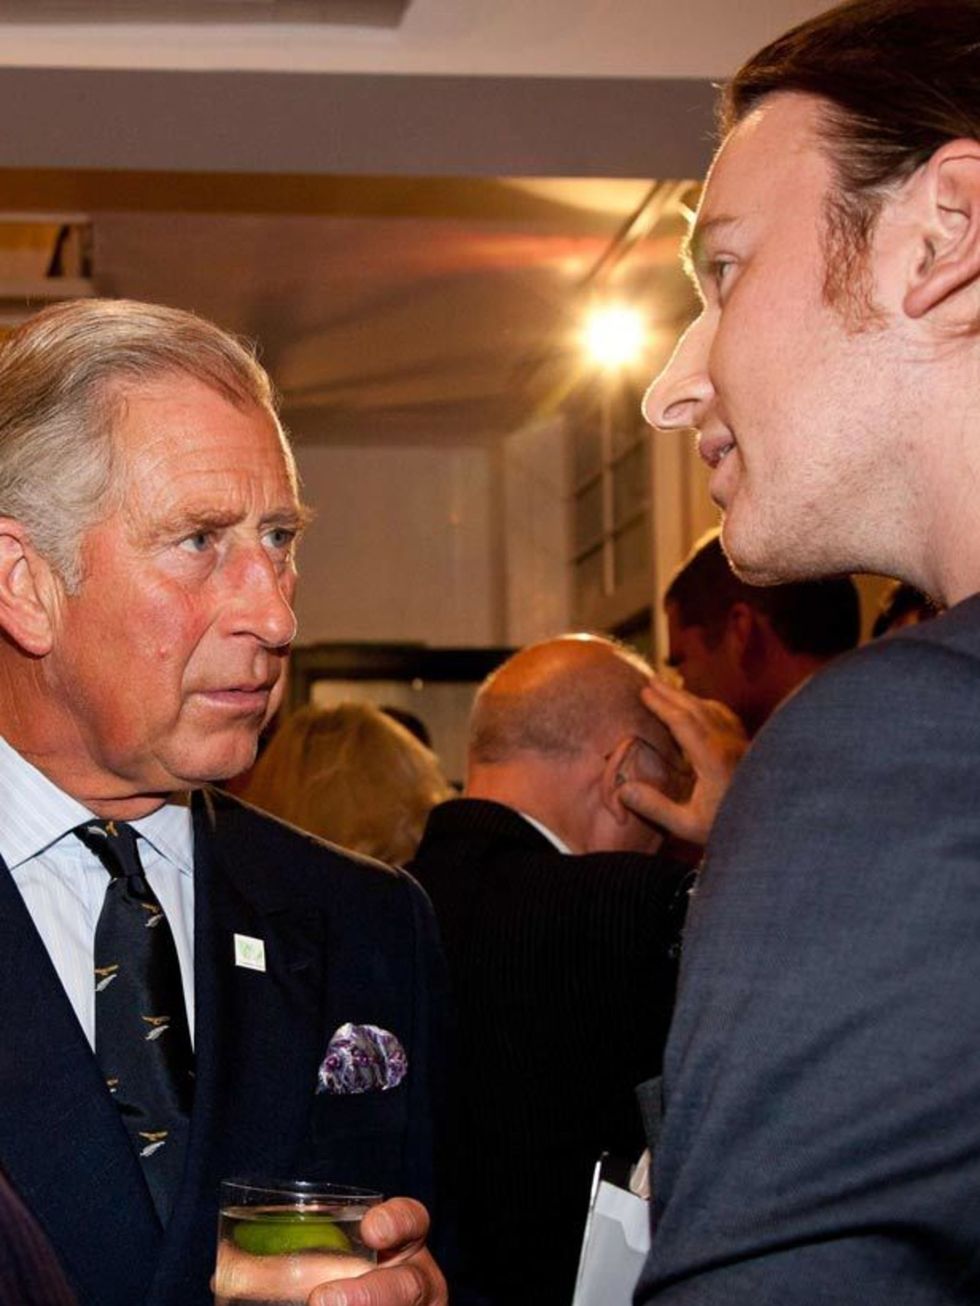 <p><a href="http://www.elleuk.com/content/search?SearchText=Prince+Charles&amp;SearchButton=Search">Prince Charles</a> &amp; <a href="http://www.elleuk.com/catwalk/collections/mark-fast/autumn-winter-2011">Mark Fast</a> at the The Wool<em> </em>Modern exh